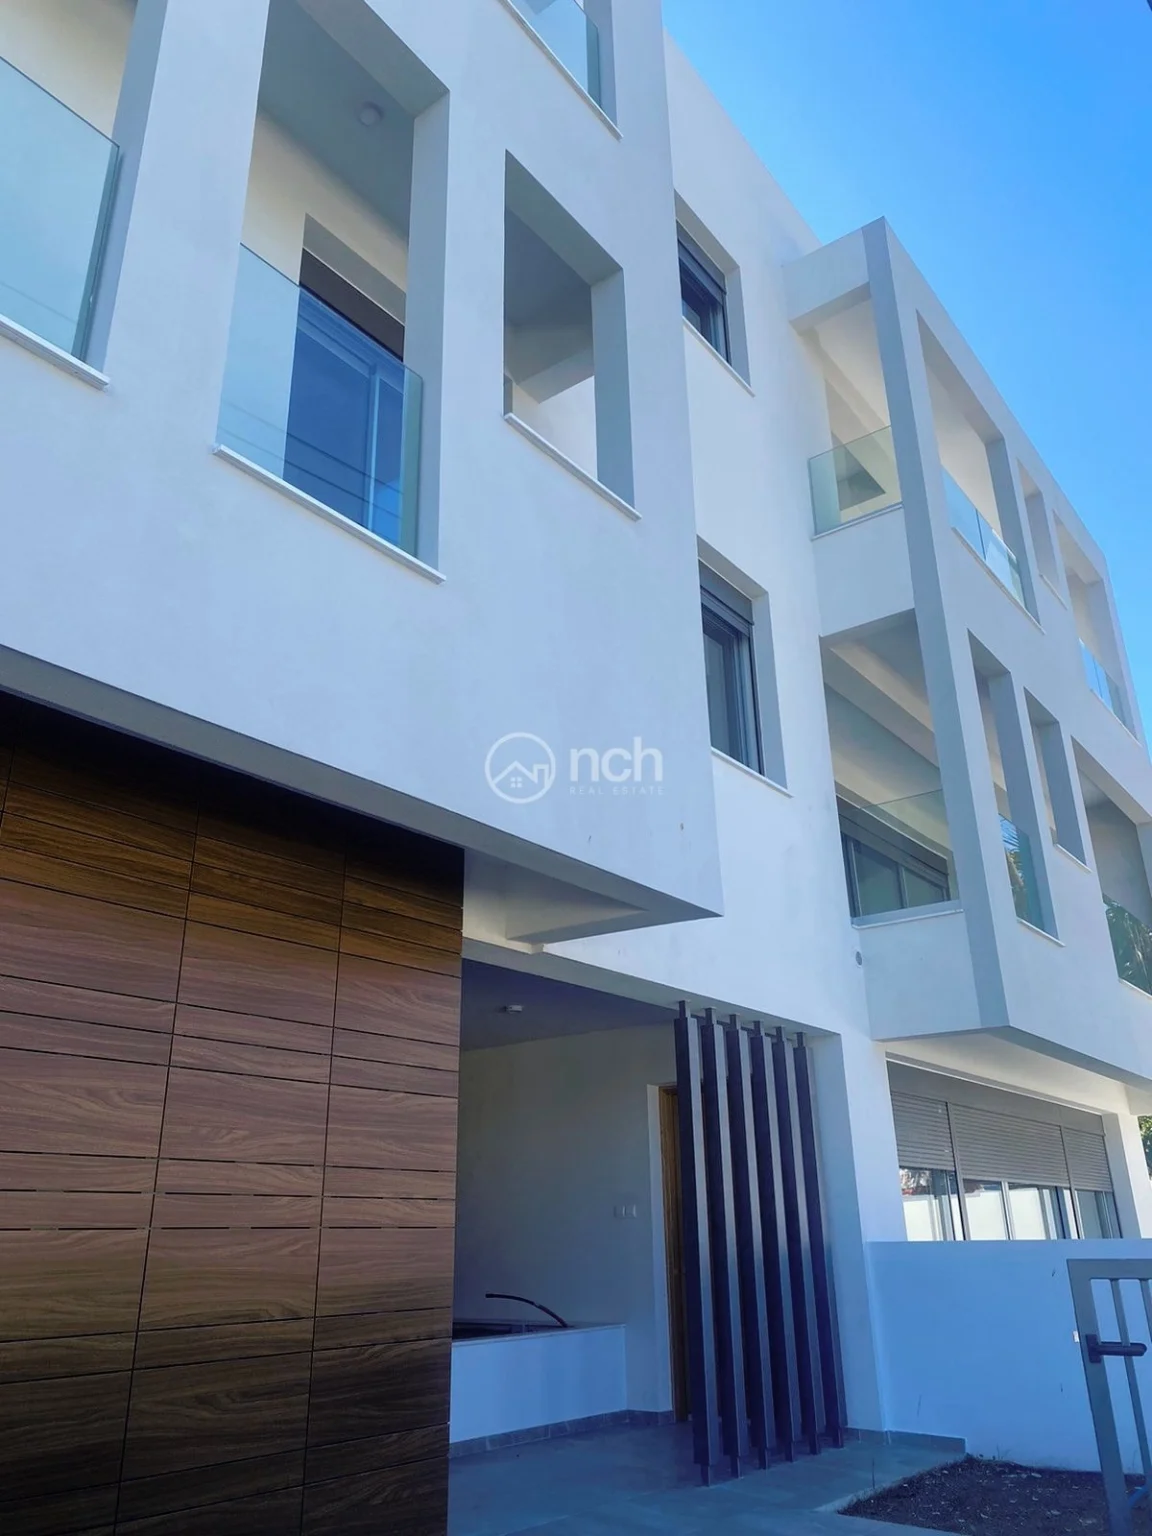 3 Bedroom Apartment for Rent in Strovolos – Archangelos, Nicosia District